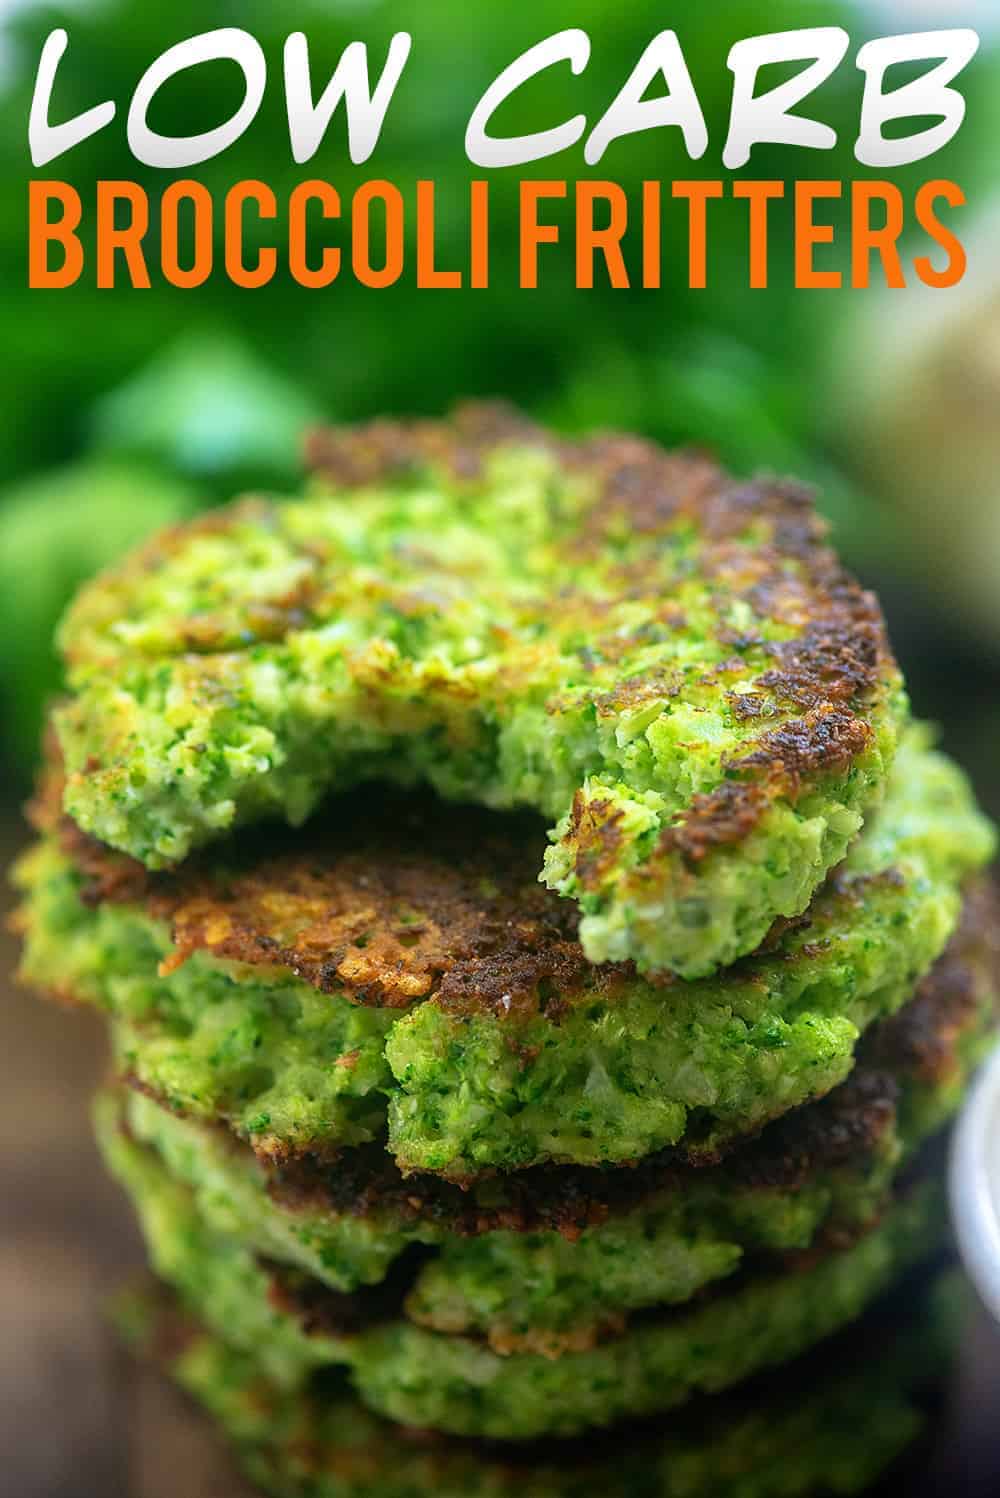 Stacked broccoli fritters with a bite out of the top one.